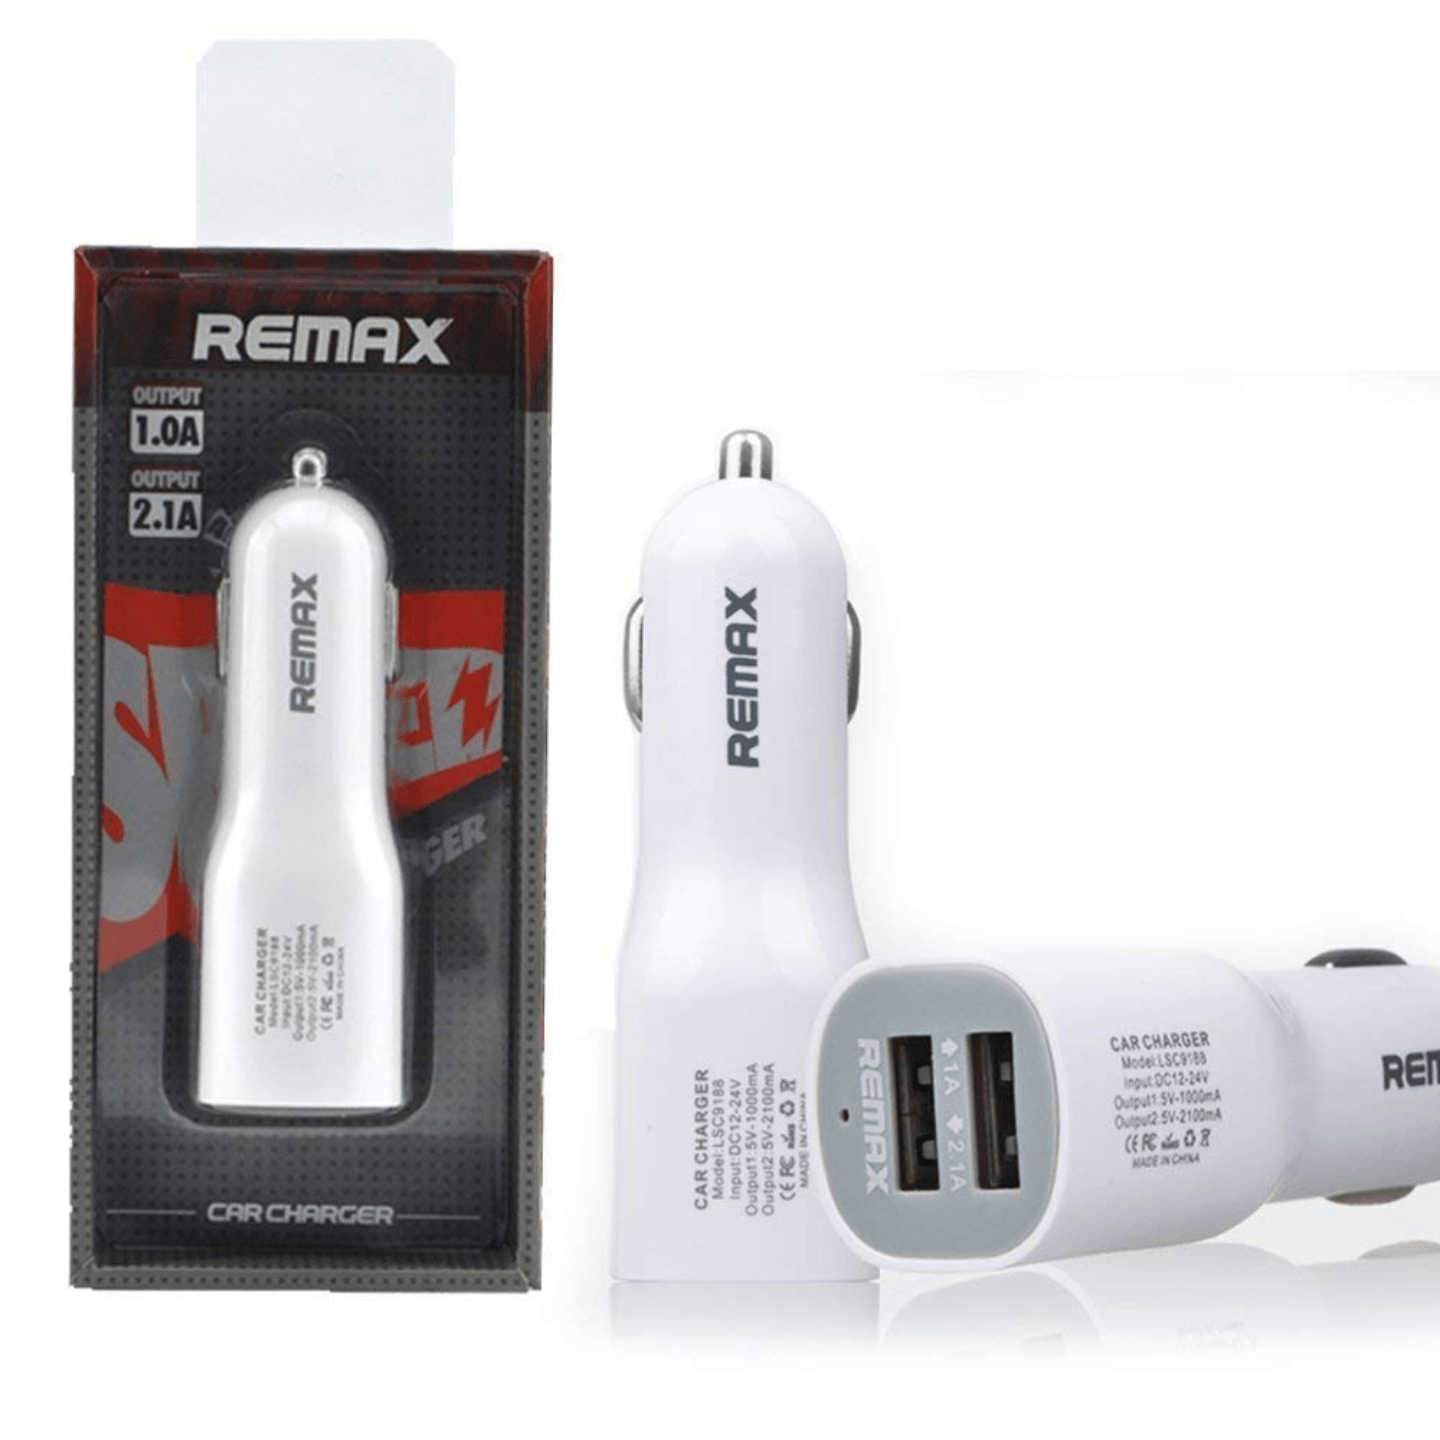 One Stop Shop Car Charger REMAX Dual Port USB Car Charger(1.0 A& 2.1 A) for All USB Devices